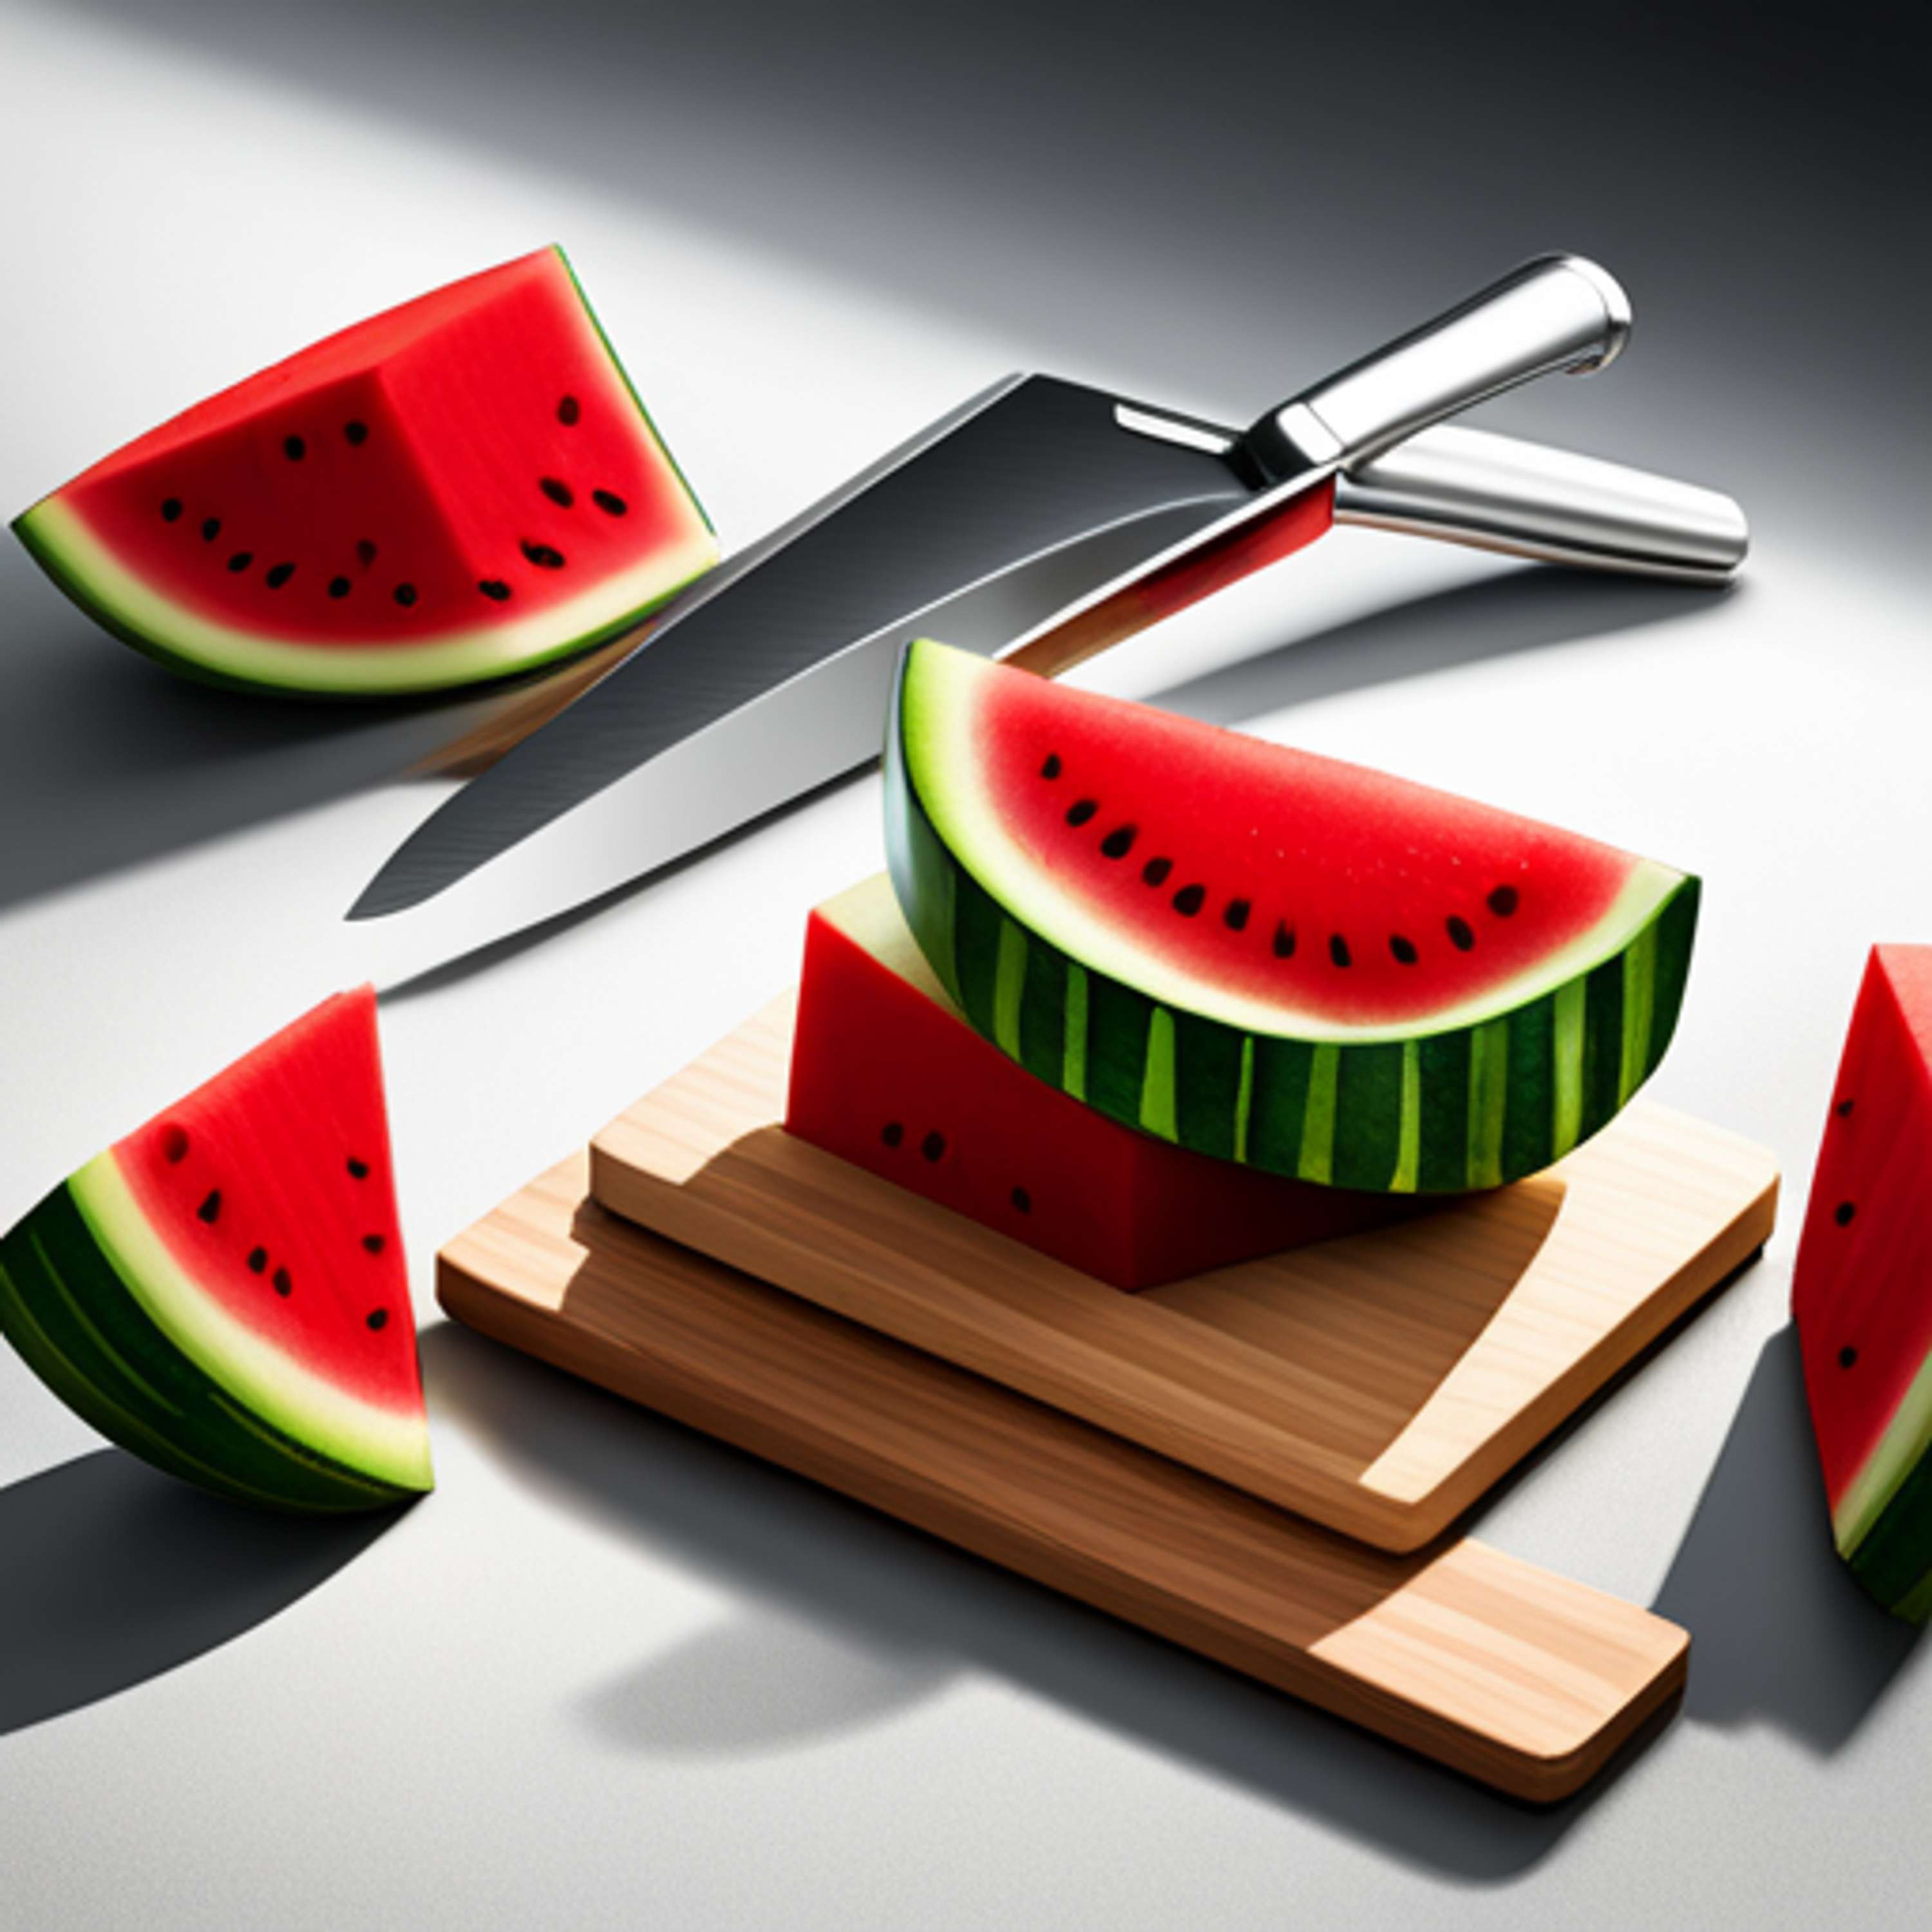 2-in-1 Watermelon Cutter Review: Worth It?